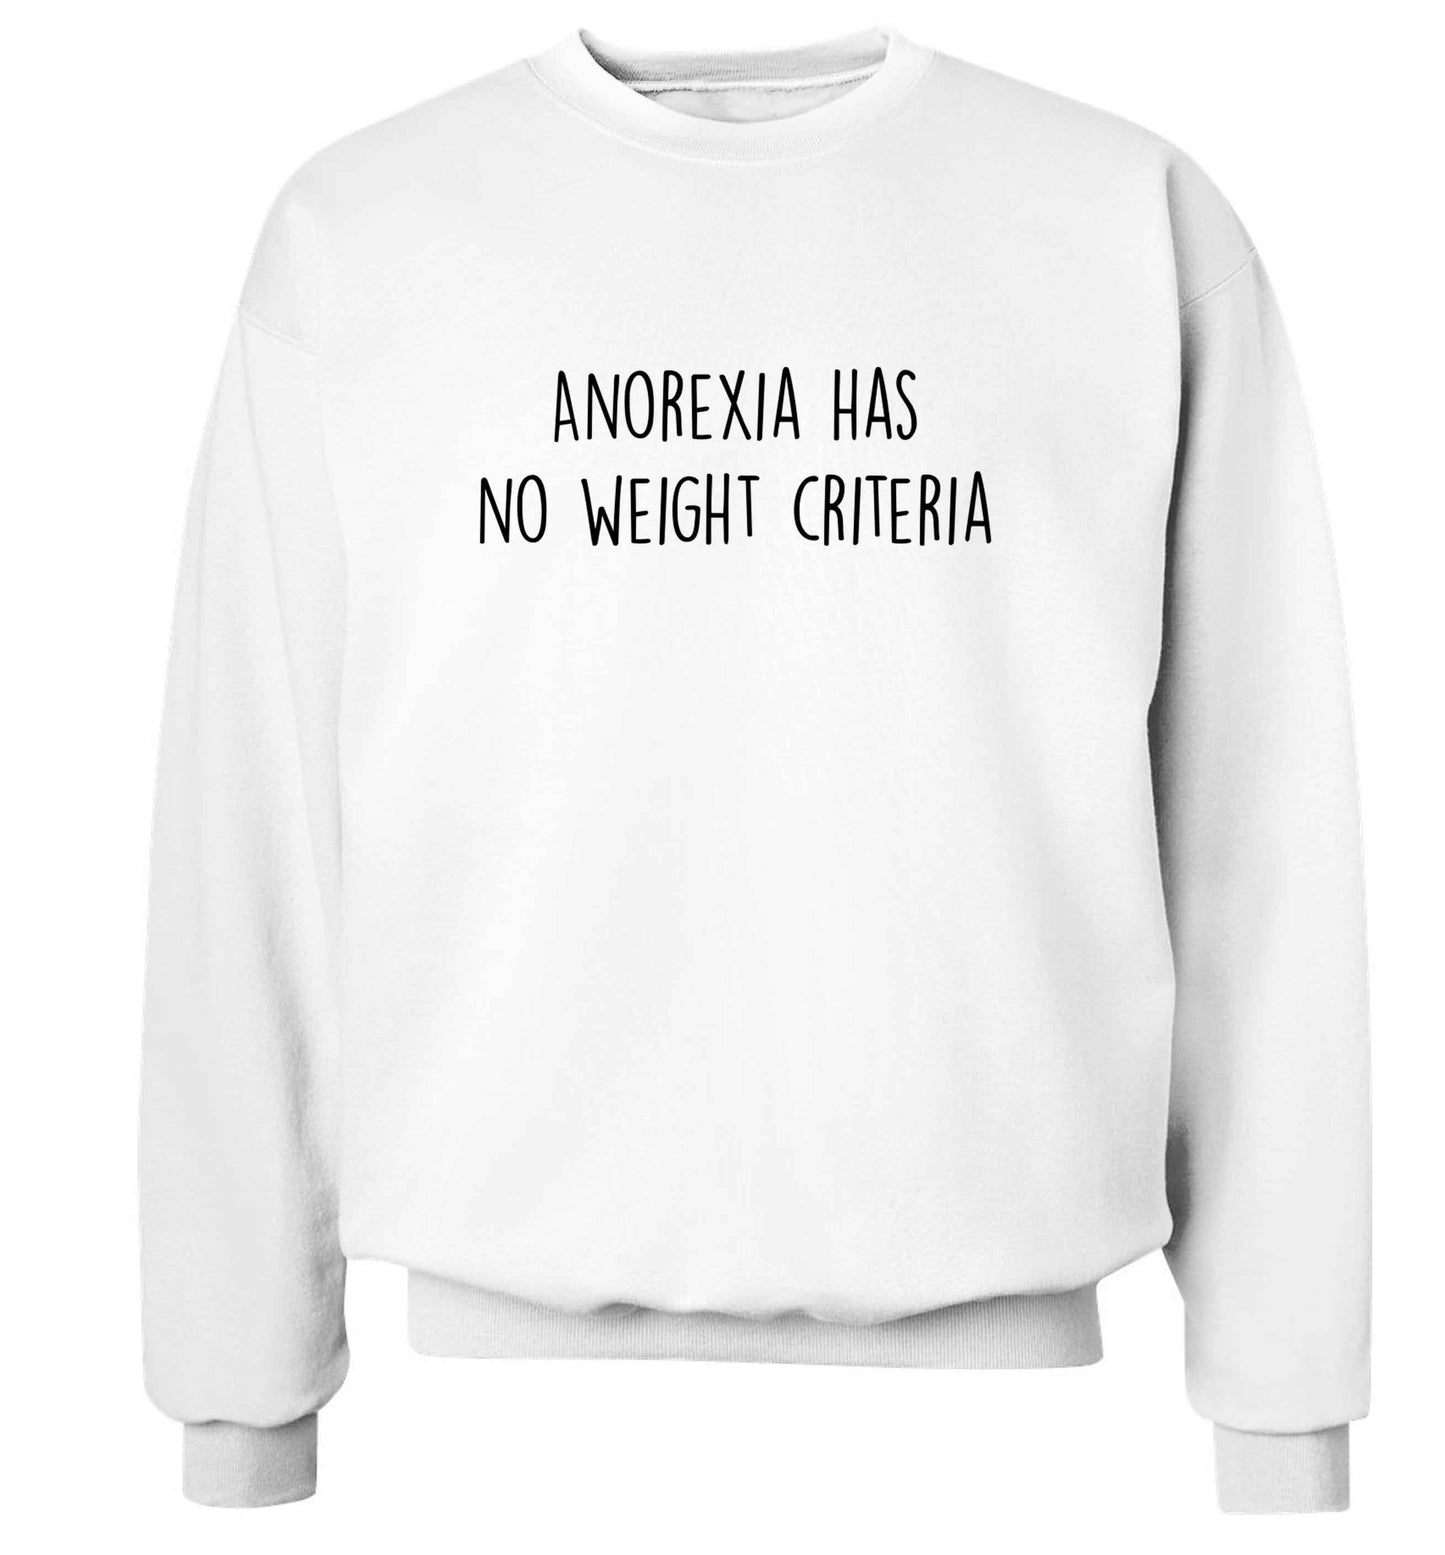 Anorexia has no weight criteria adult's unisex white sweater 2XL